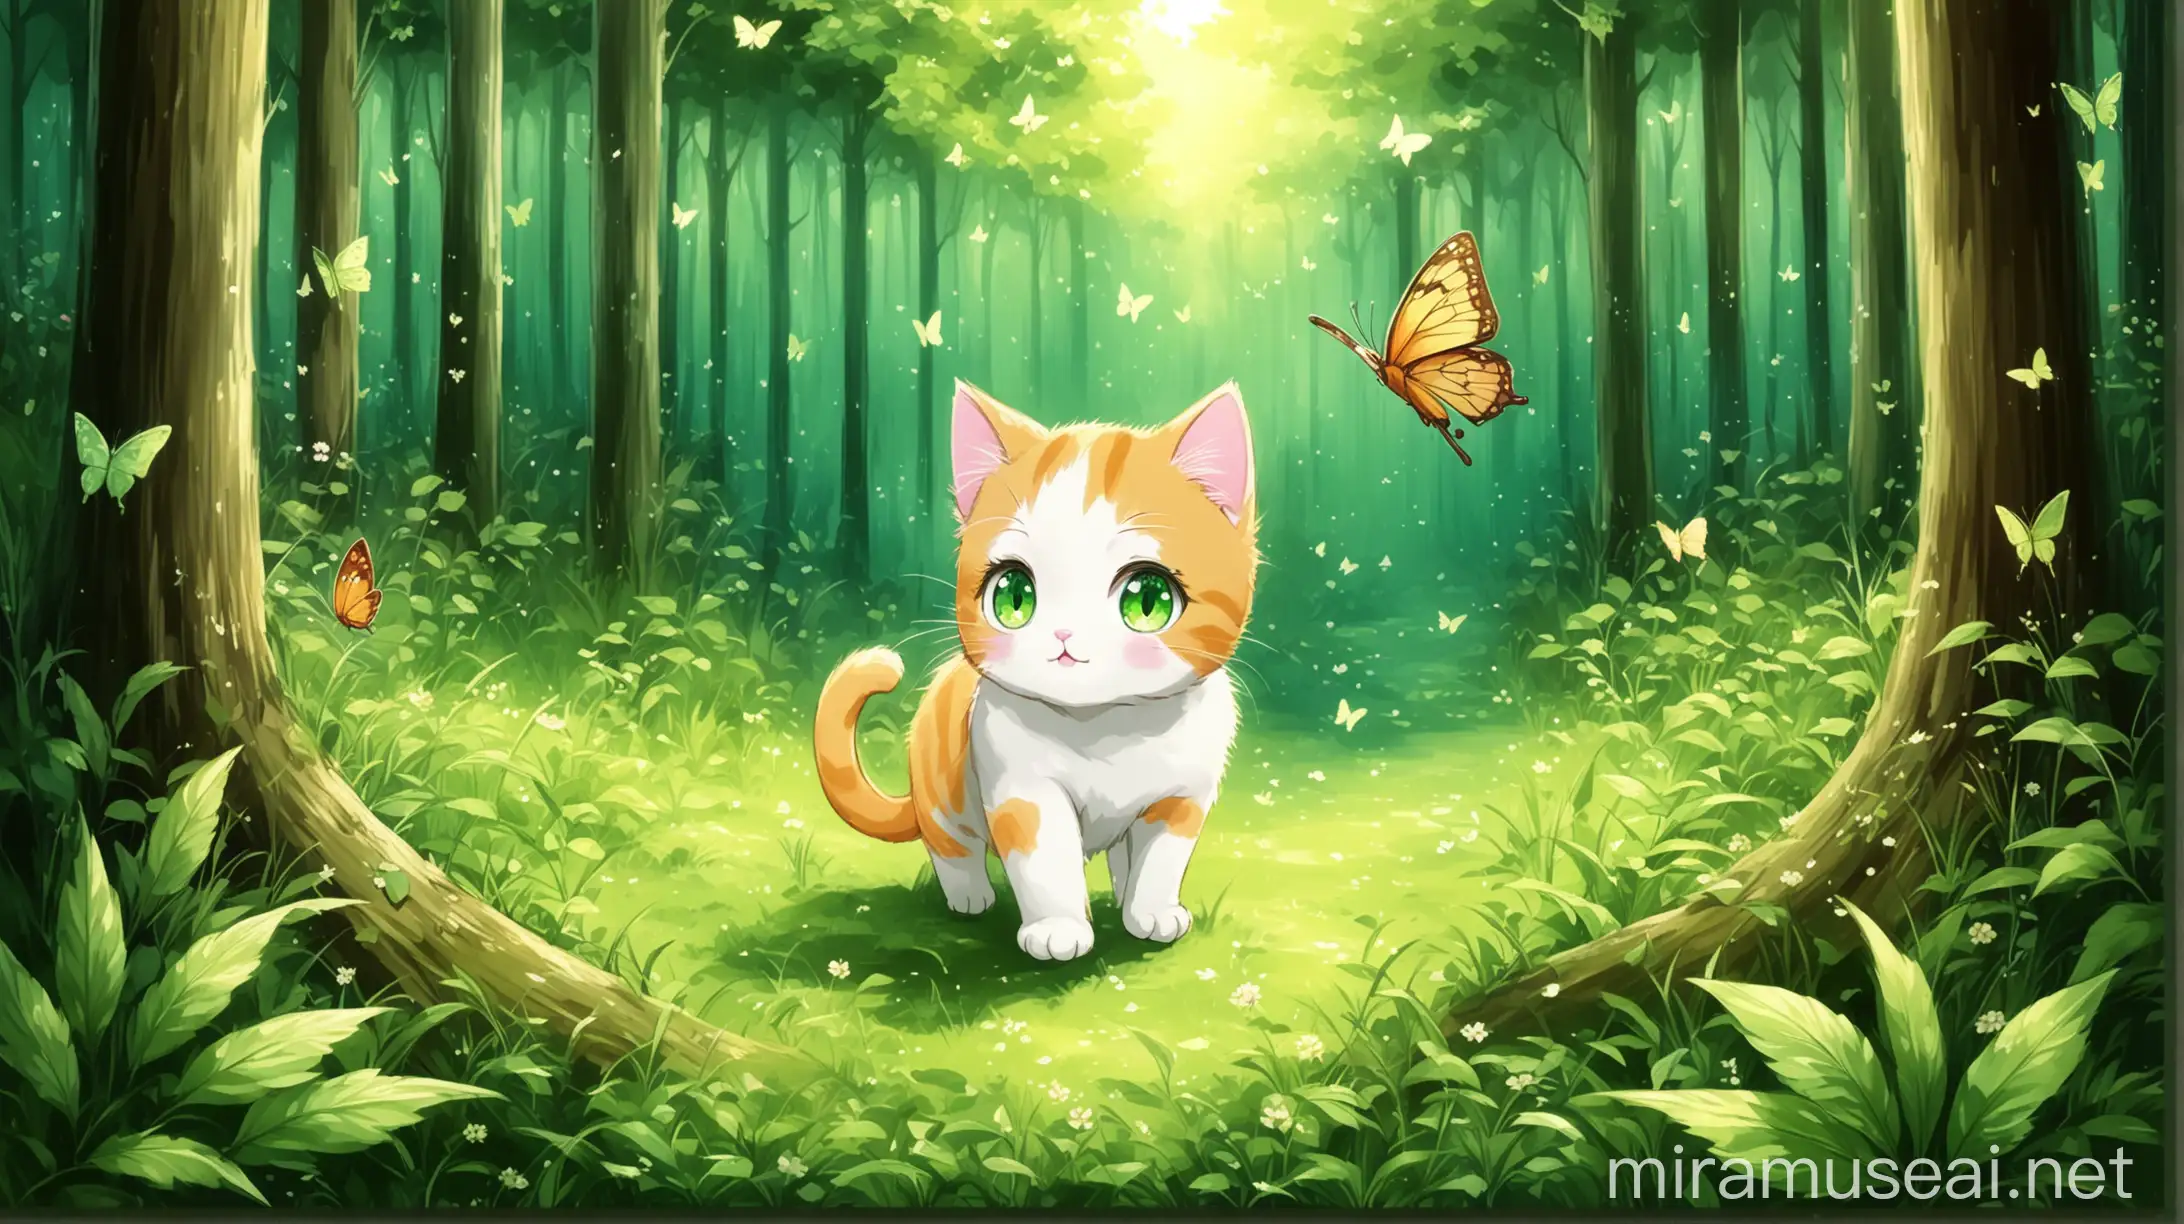 Playful Anime Painting Cute Cat Alone in Lush Green Forest with Butterfly